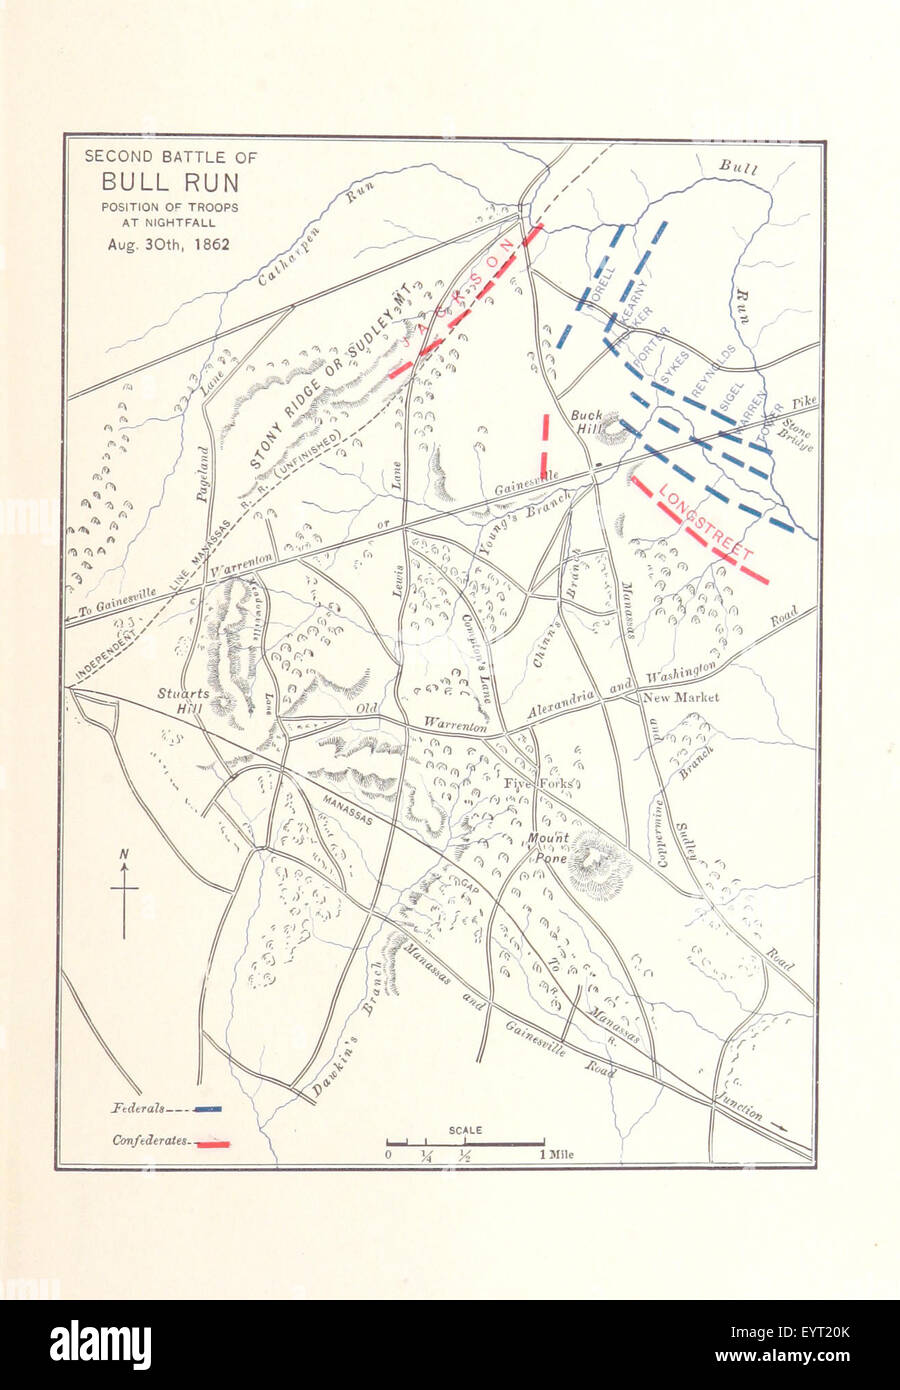 From Manassas to Appomattox. Memoirs of the civil war in America ... Illustrated, etc Image taken from page 241 of 'From Manassas to Appomattox Stock Photo